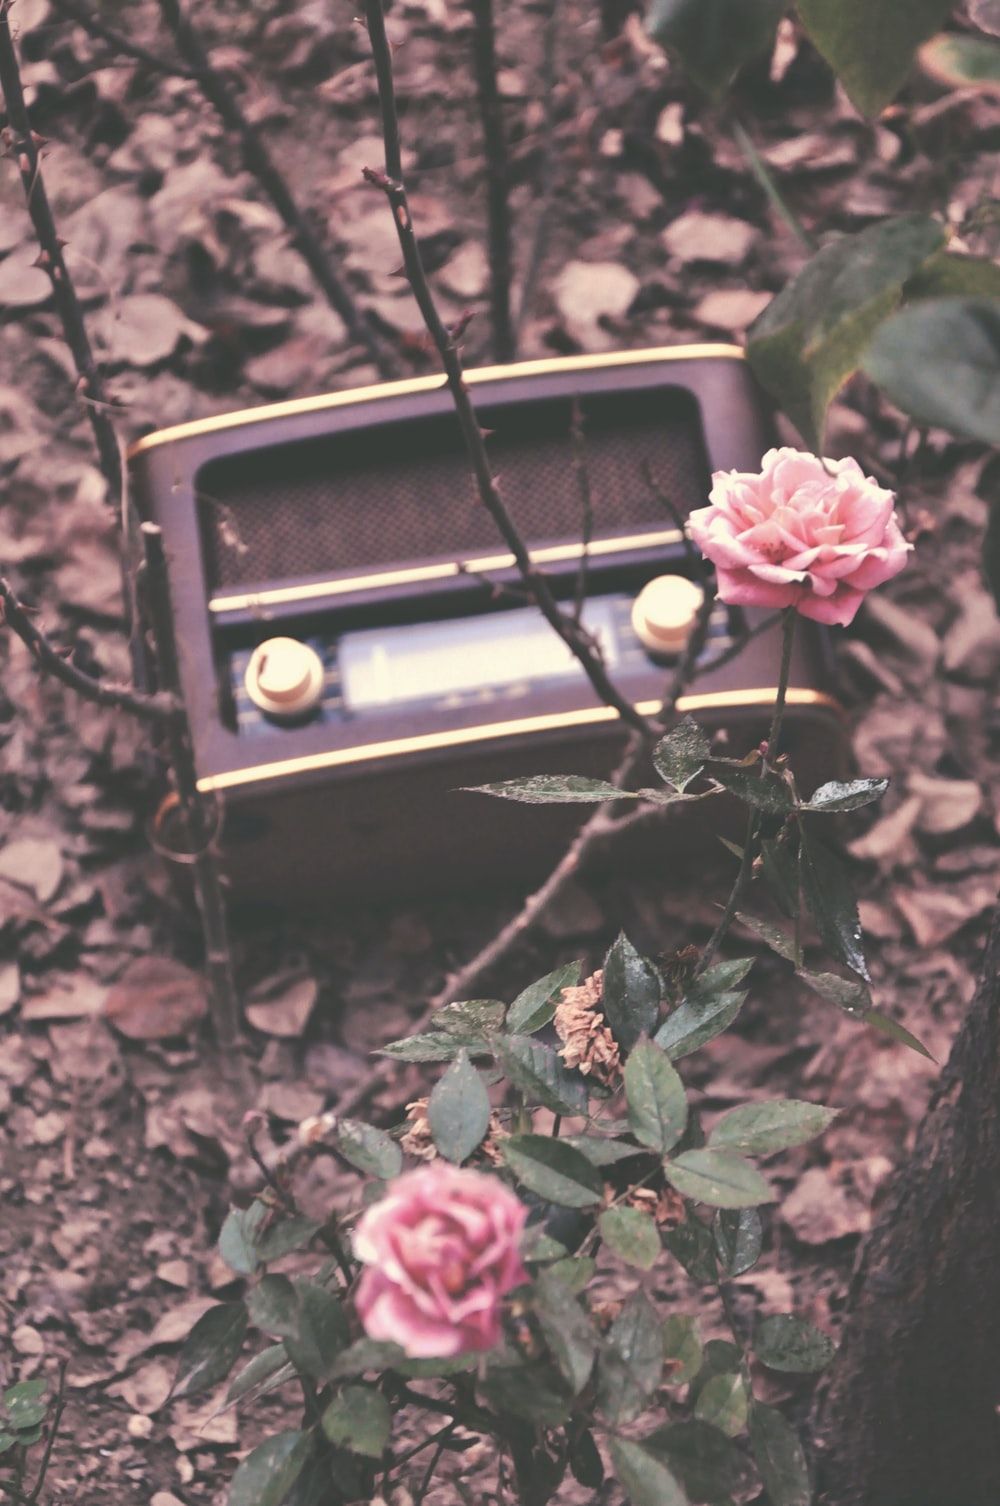 Vintage Radio Background Images, HD Pictures and Wallpaper For